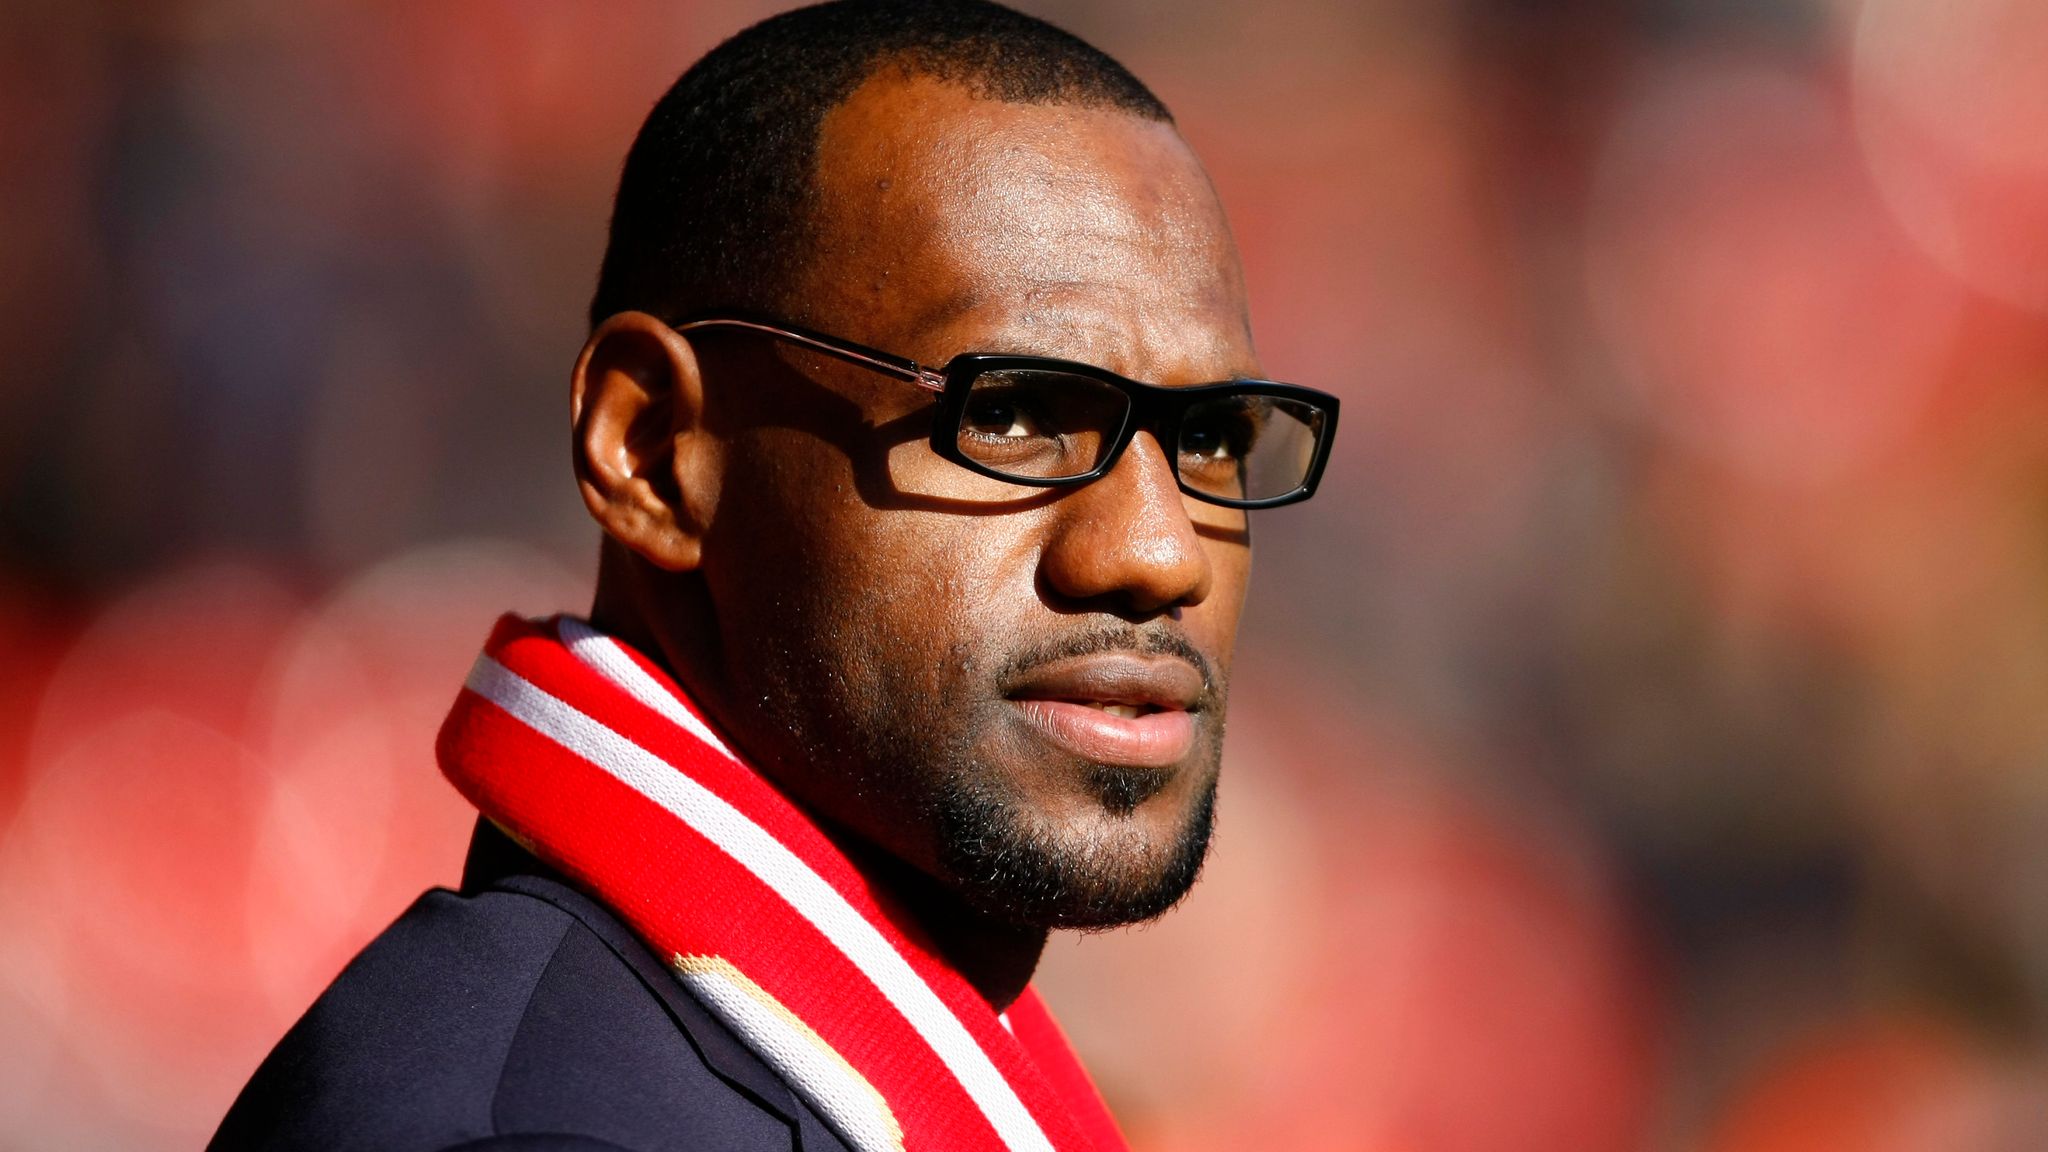 LeBron James is hyped on Liverpool advancing to Champions League semis